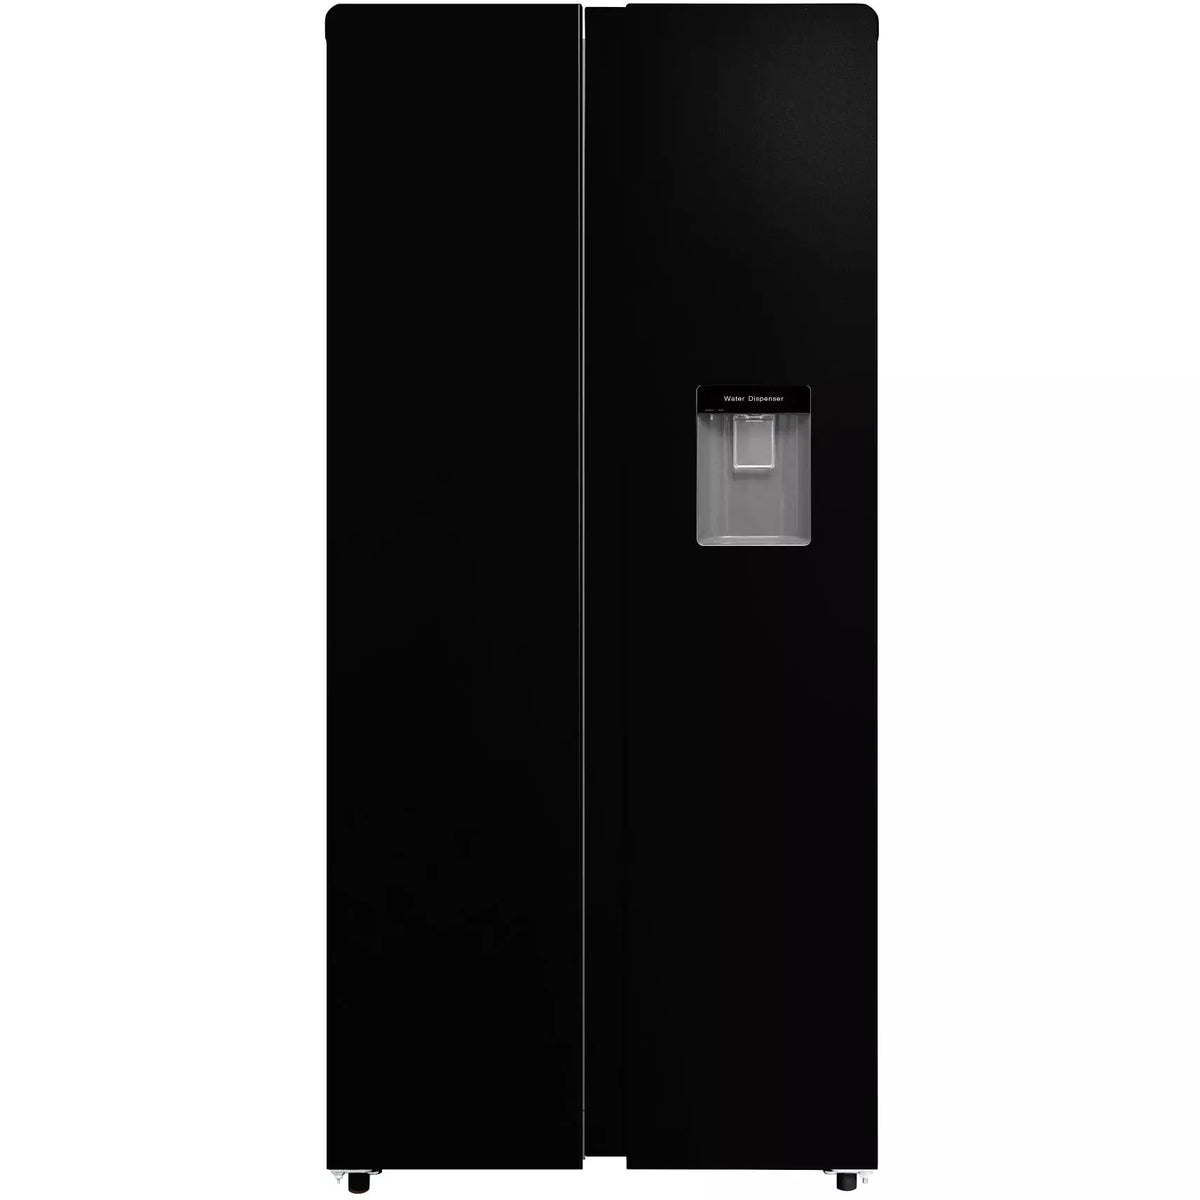 Servis 372L Frost Free American Side by Side Fridge Freezer - Black | S9383WDKBL from Servis - DID Electrical